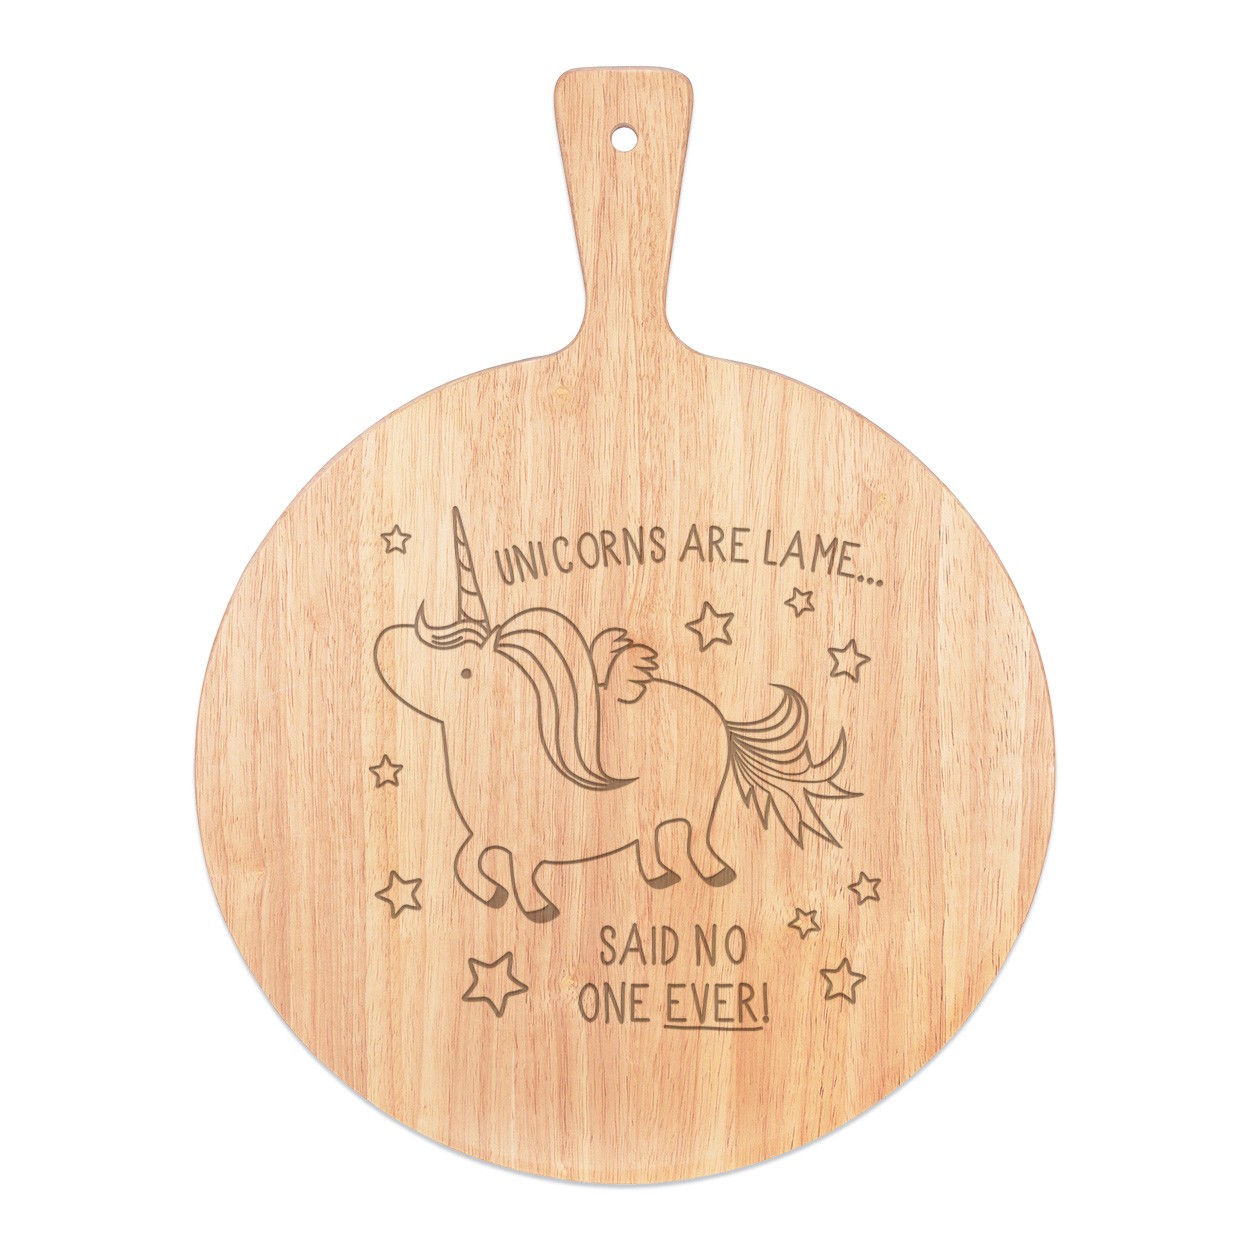 Unicorns Are Lame Said No One Ever Pizza Board Paddle Serving Tray Handle Round Wooden 45x34cm